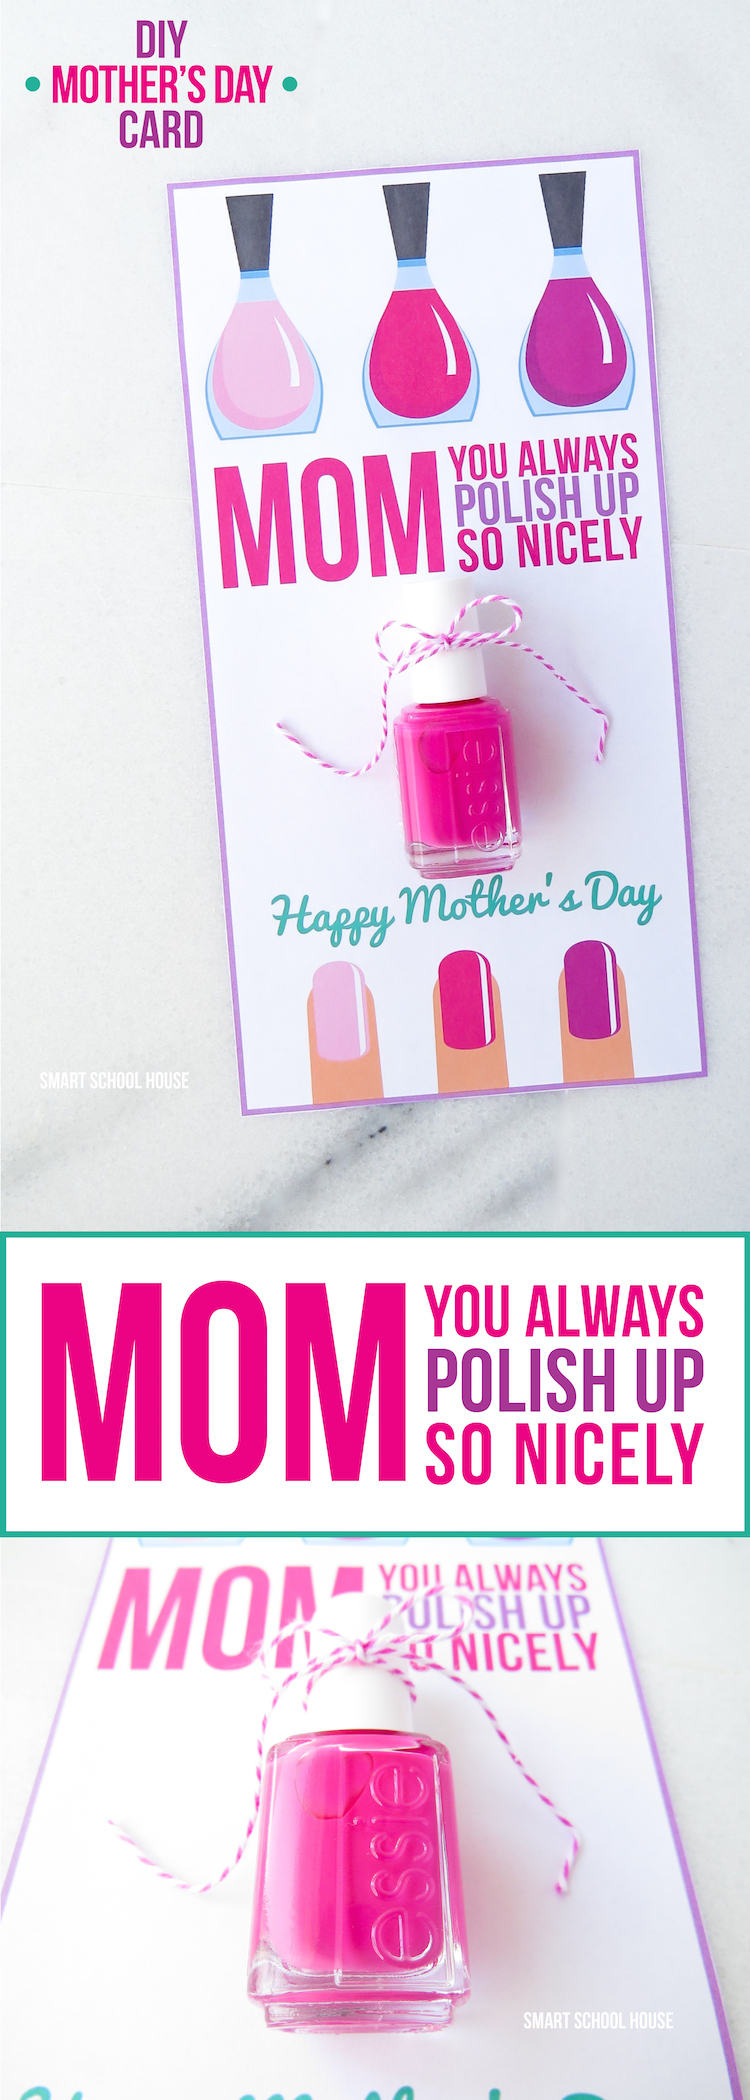 DIY Nail Polish Mother's Day Card. Mom, you always polish up so nicely! Download your free copy here --->